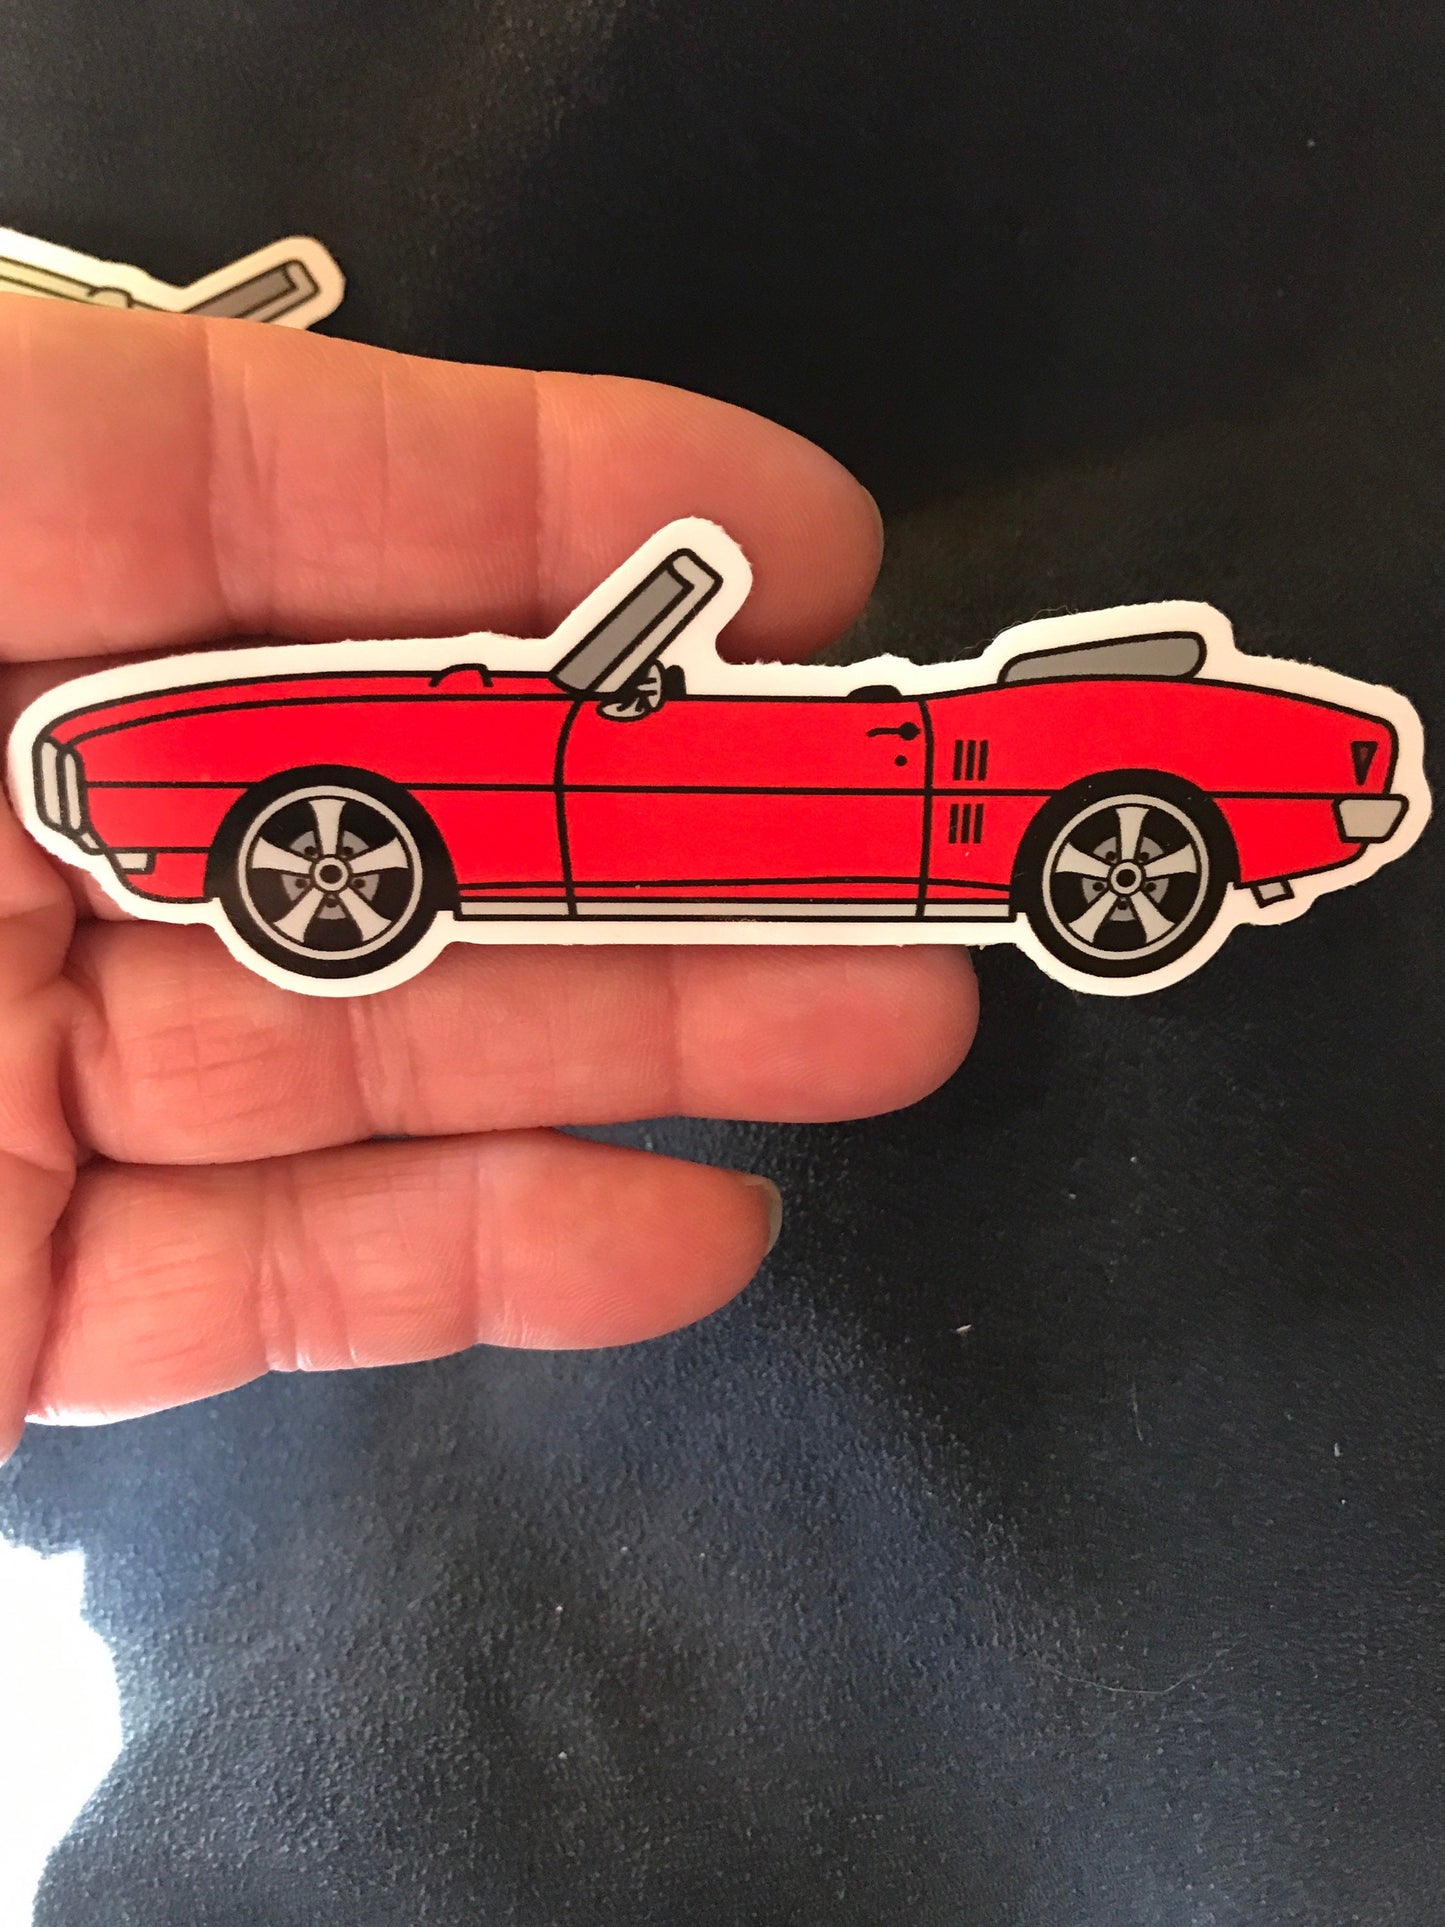 60’s Pontiac Firebird STICKERS 2 colors available